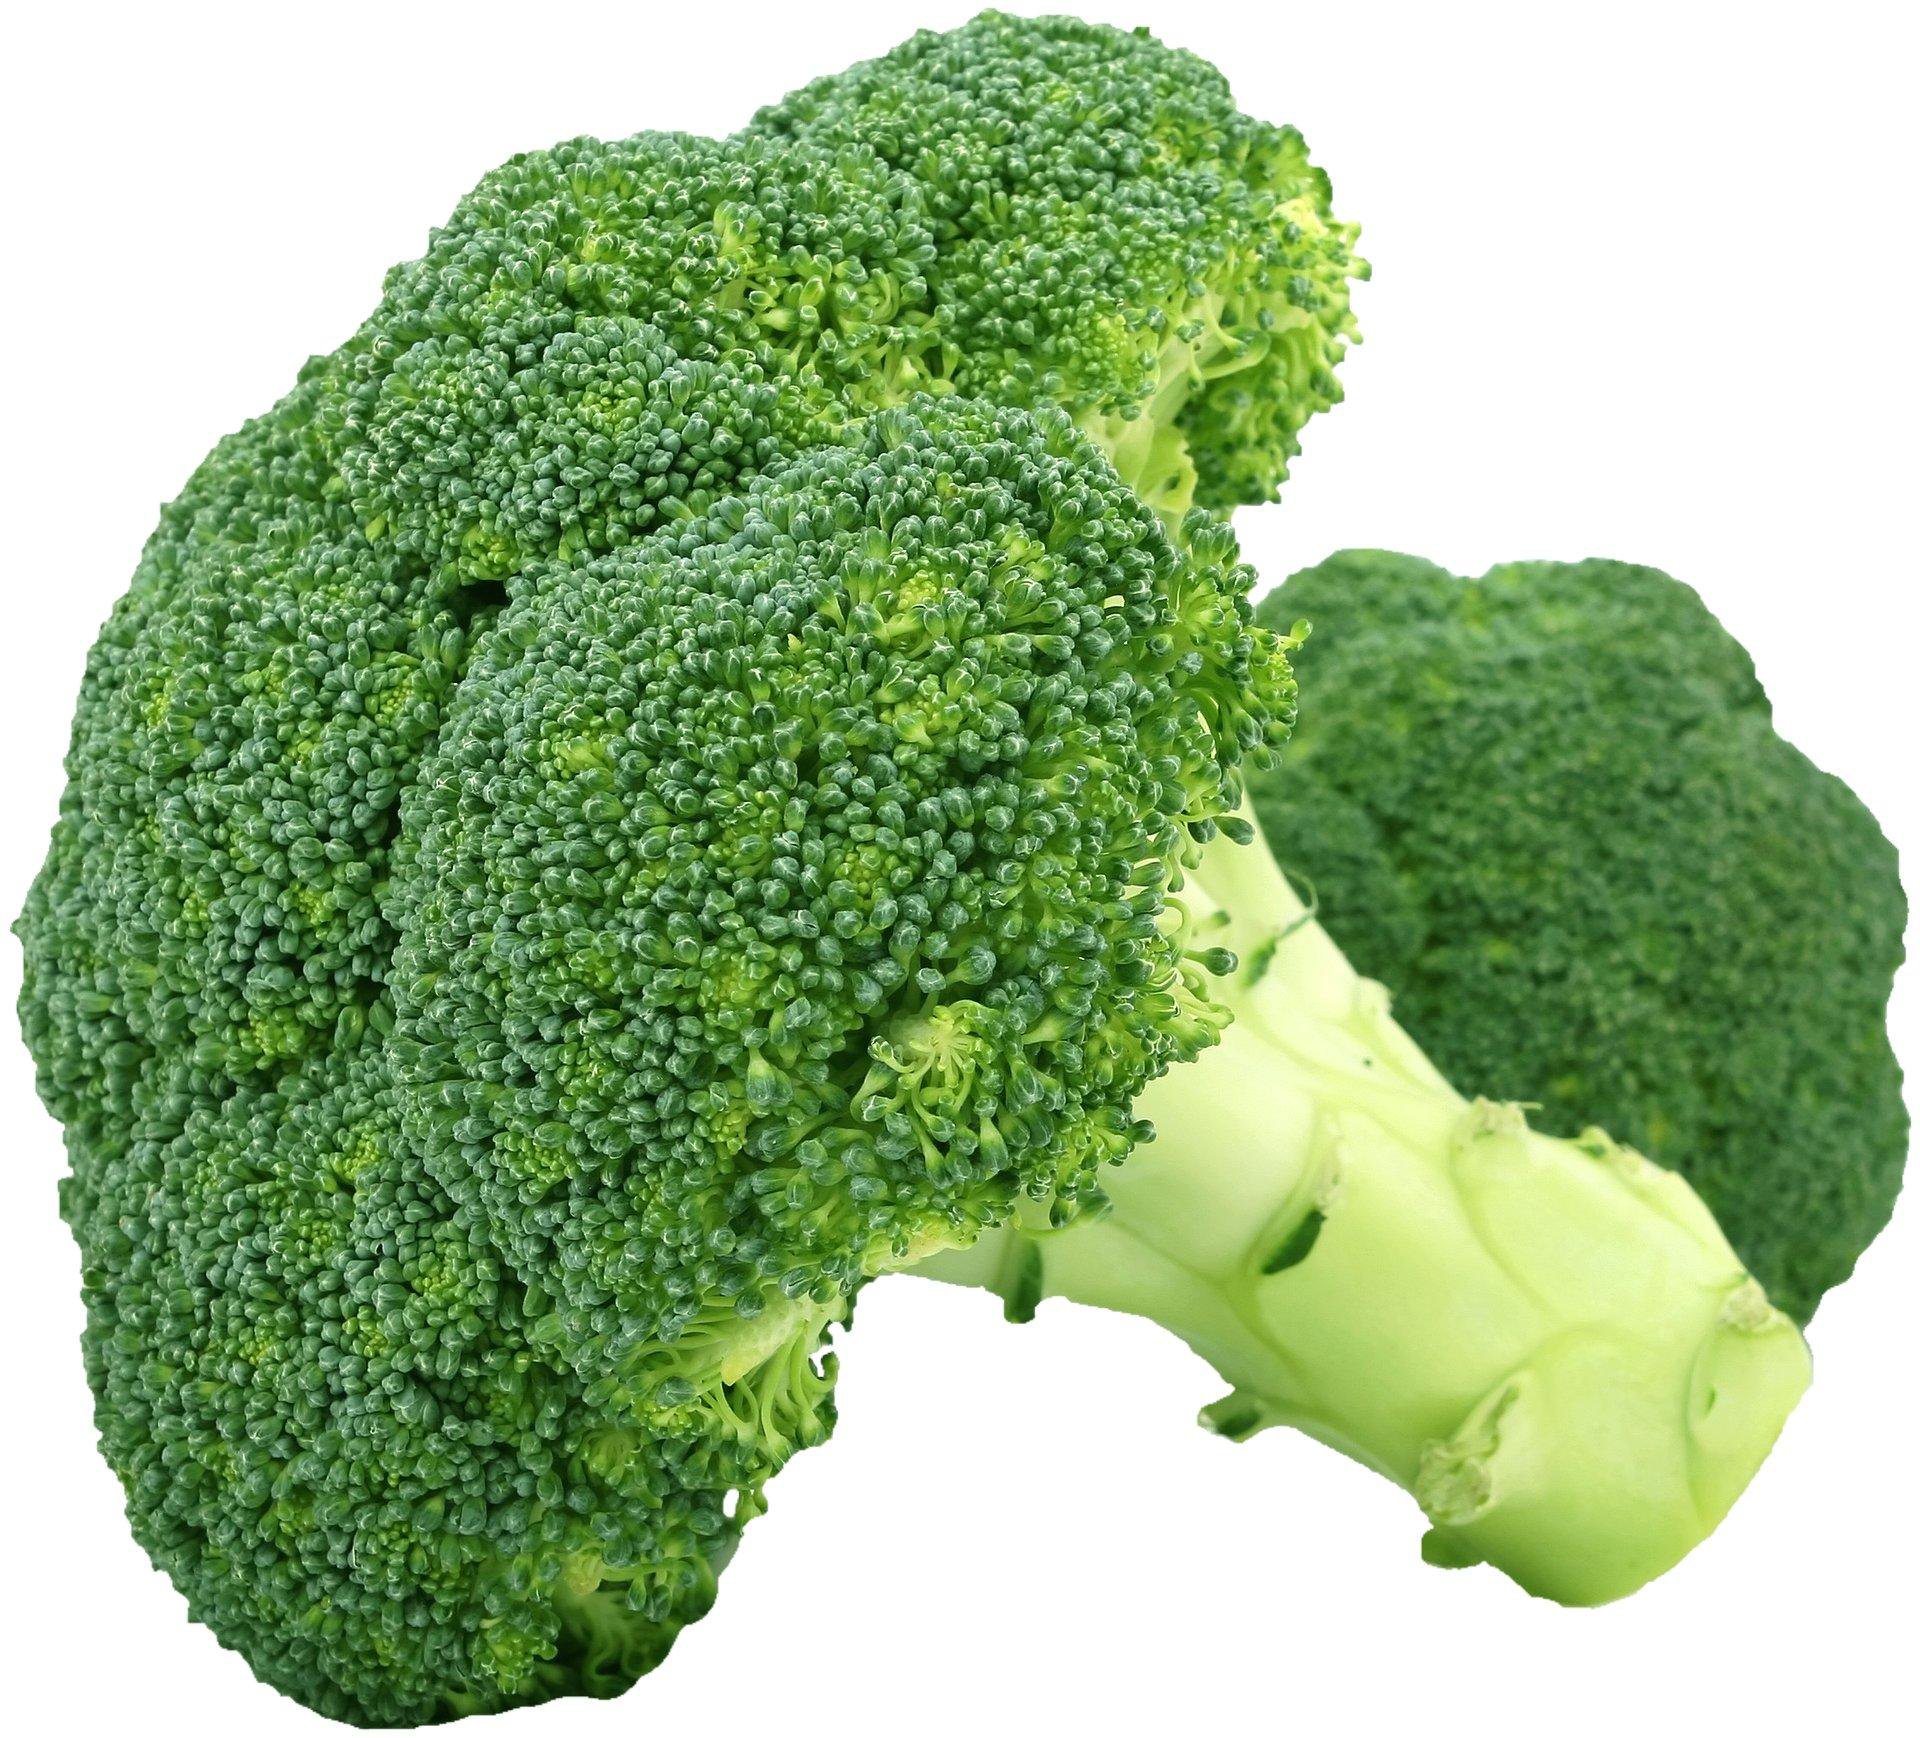 Broccoli for cancer? Really?